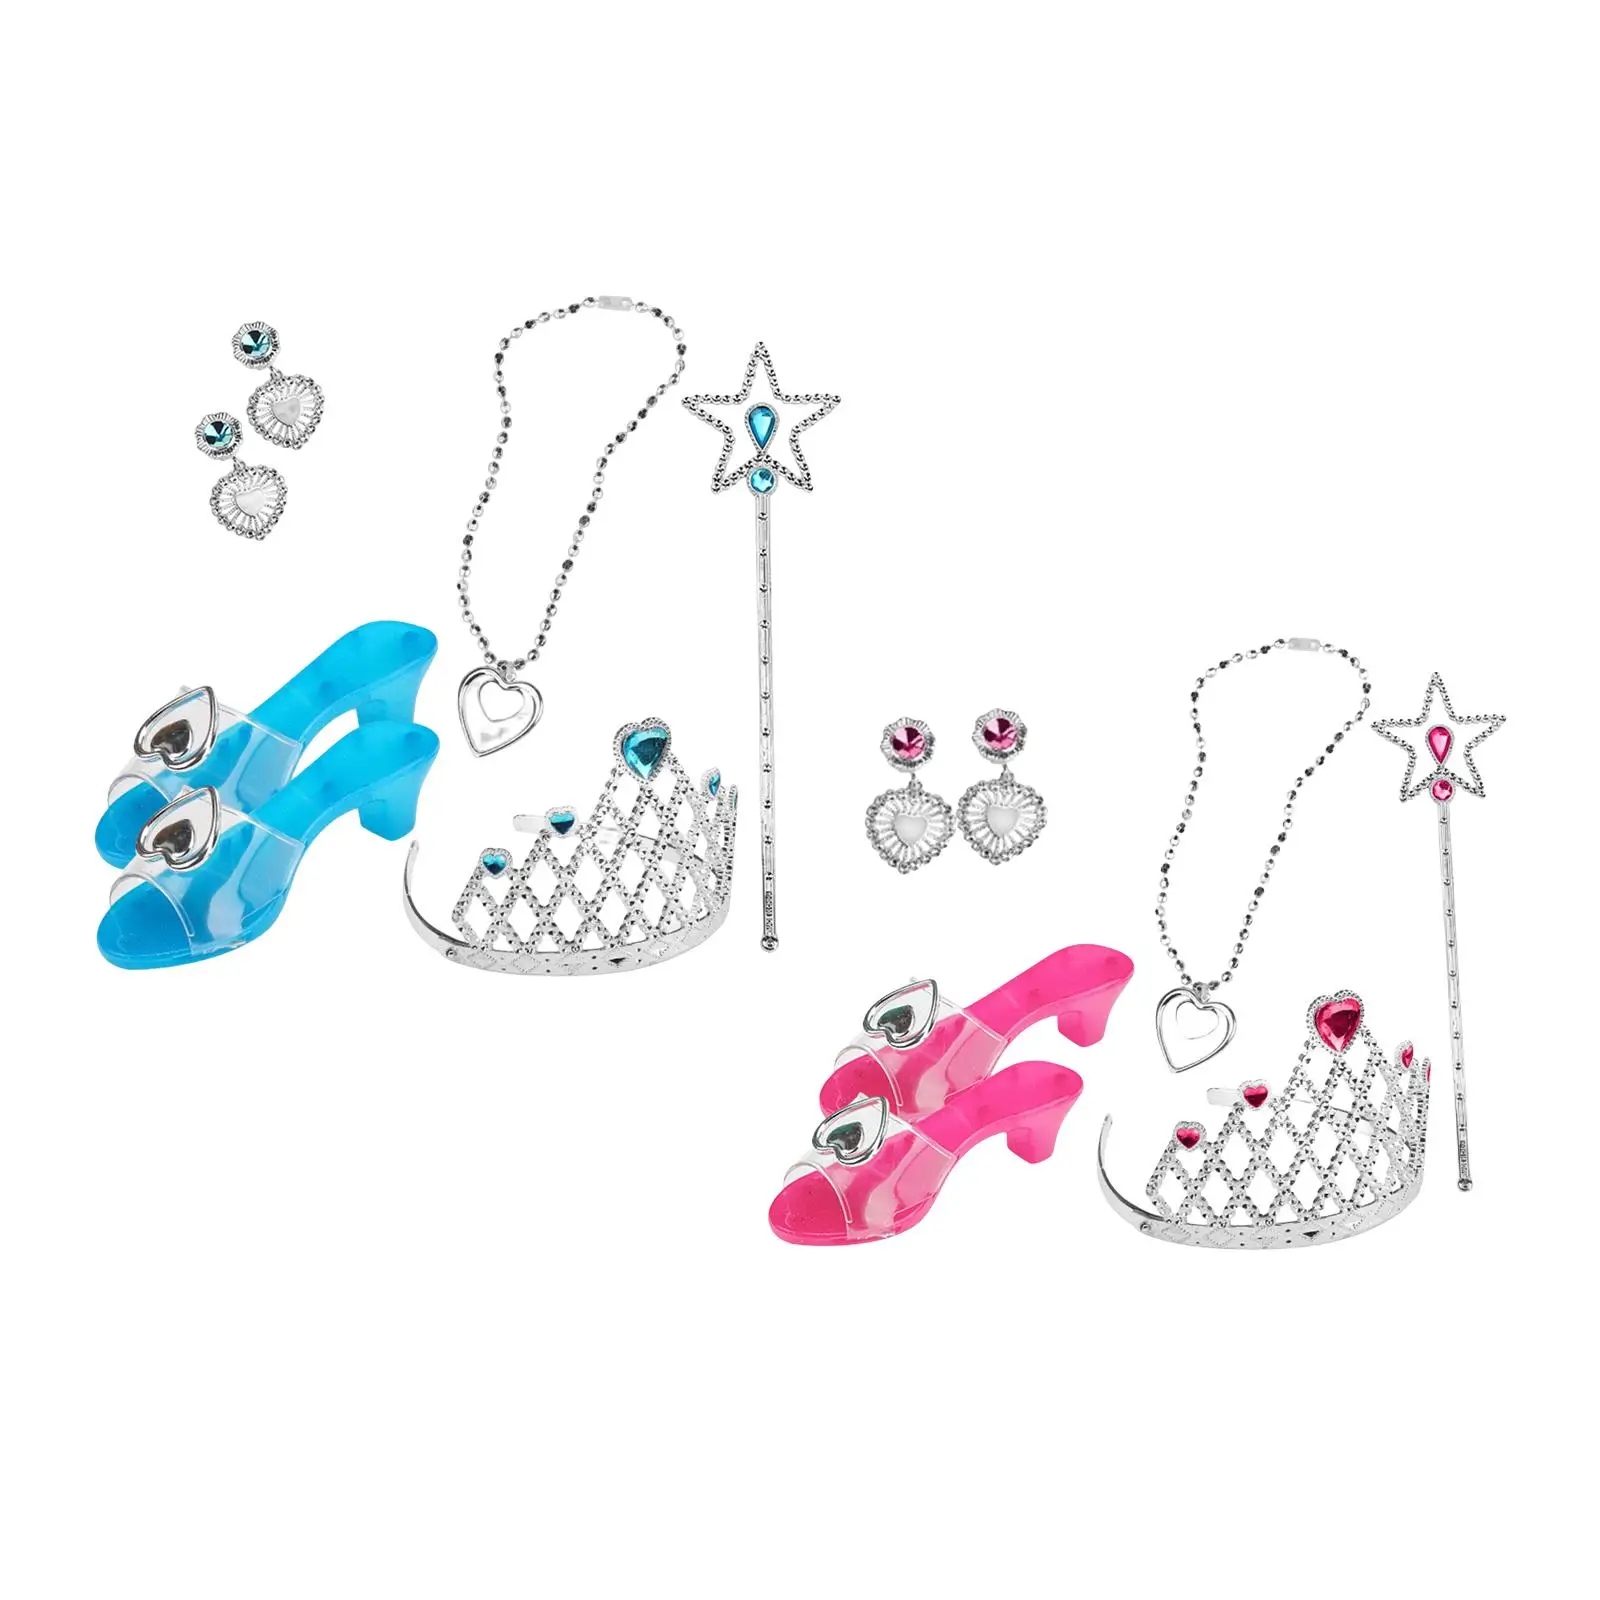 7 Pieces Little Girls Jewelry necklace Gift Set pole Earrings Shoes